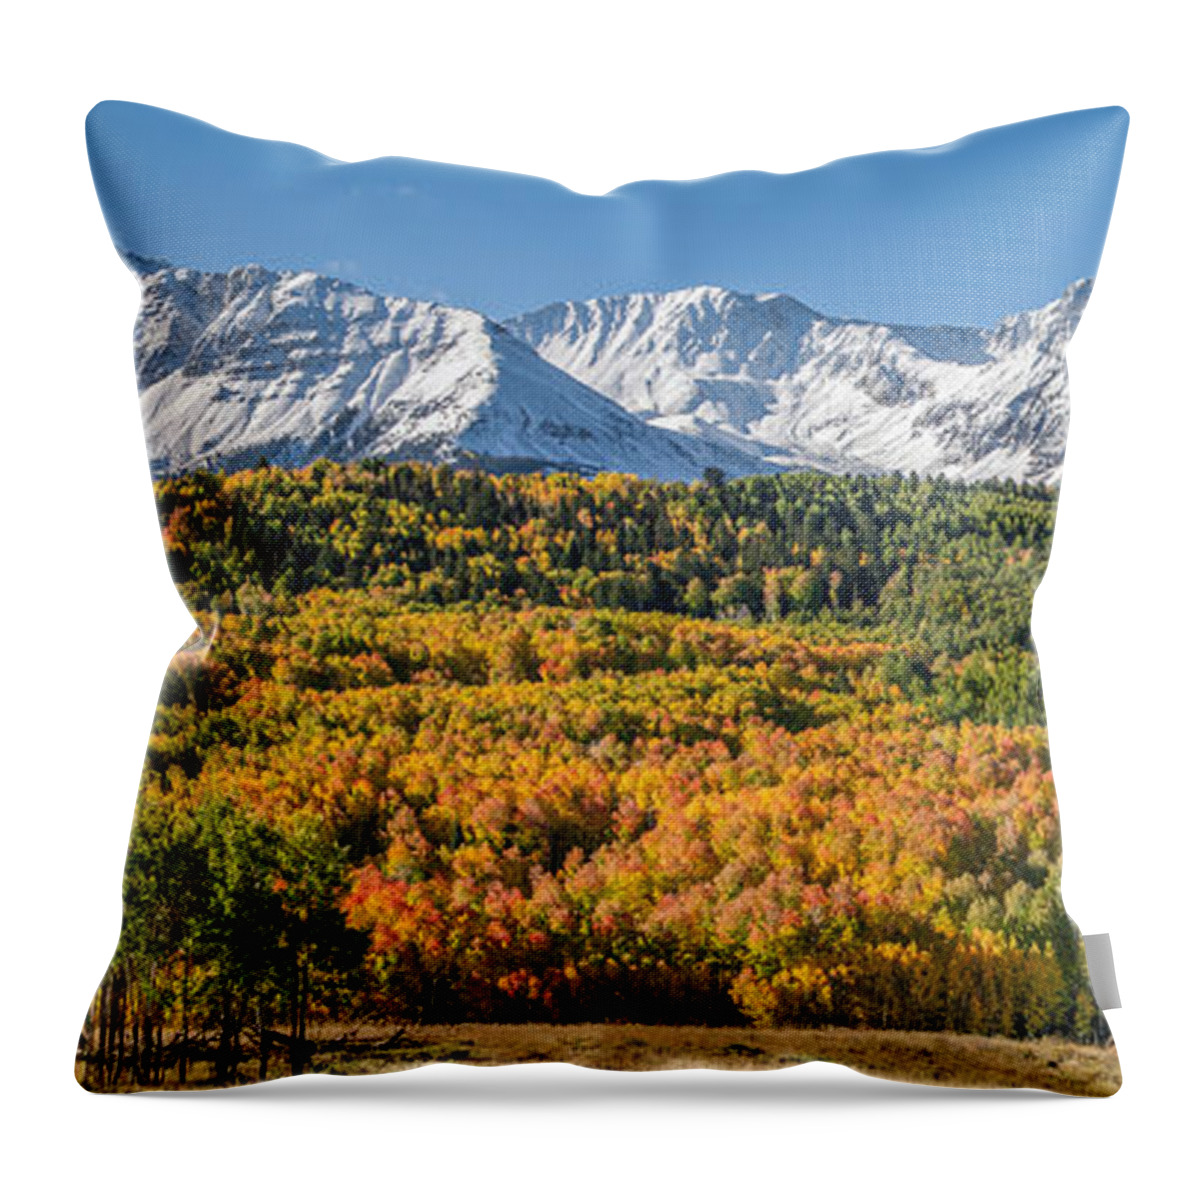 Wilson Throw Pillow featuring the photograph Wilson Mesa by Aaron Spong